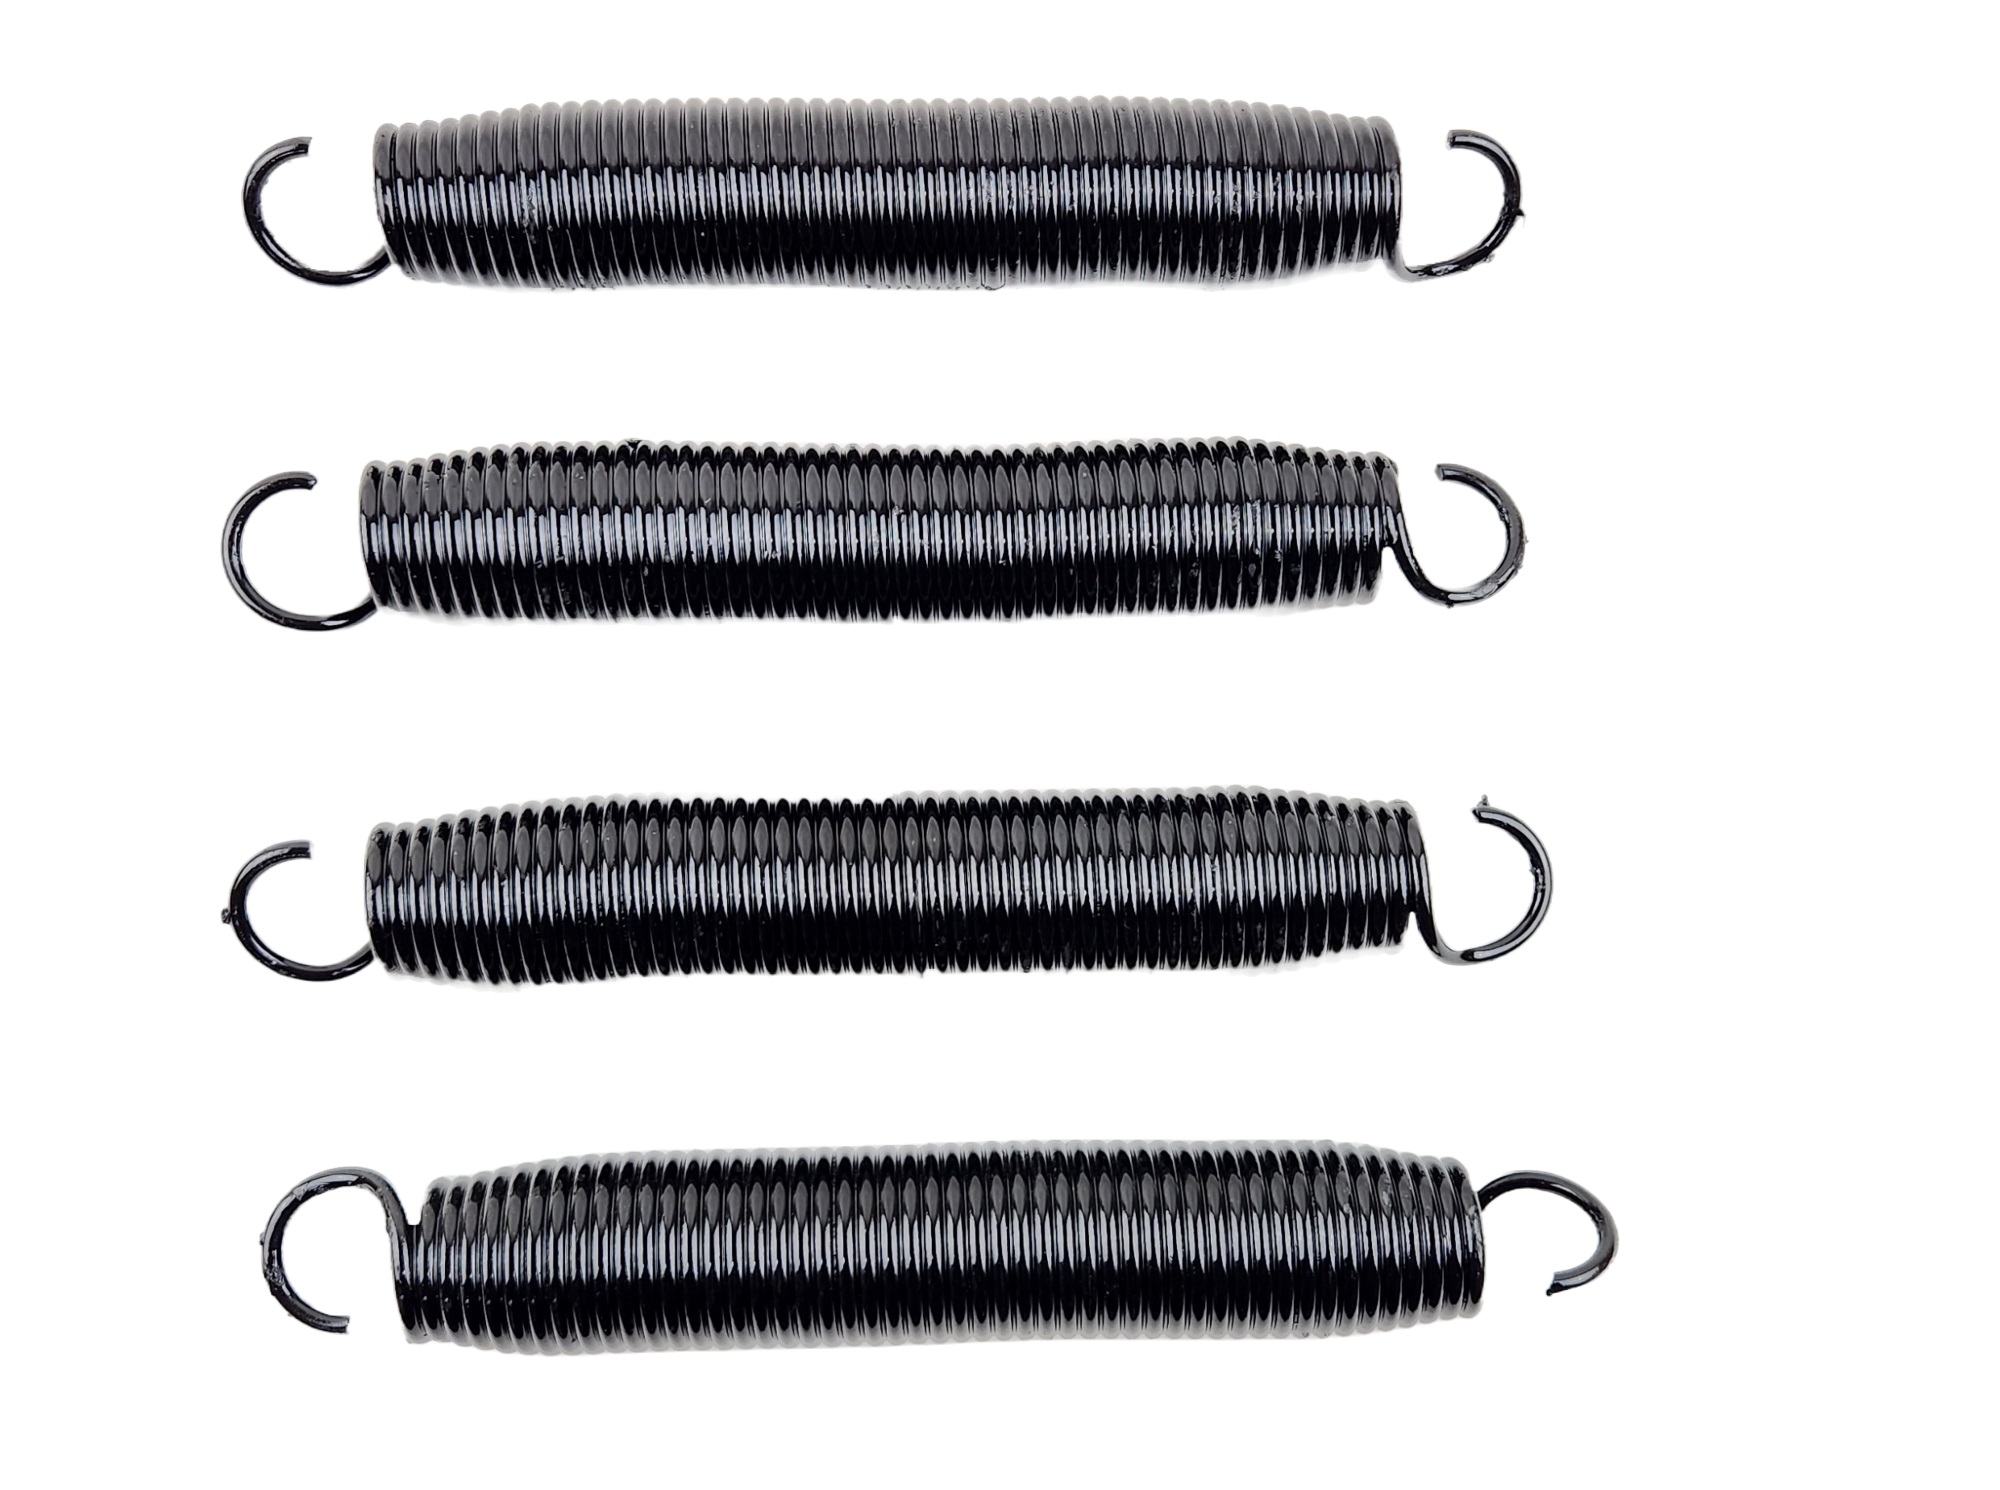 HWH R6824 Replacement Spring Kit for Hydraulic Leveling Jacks - Pair (4 Springs)